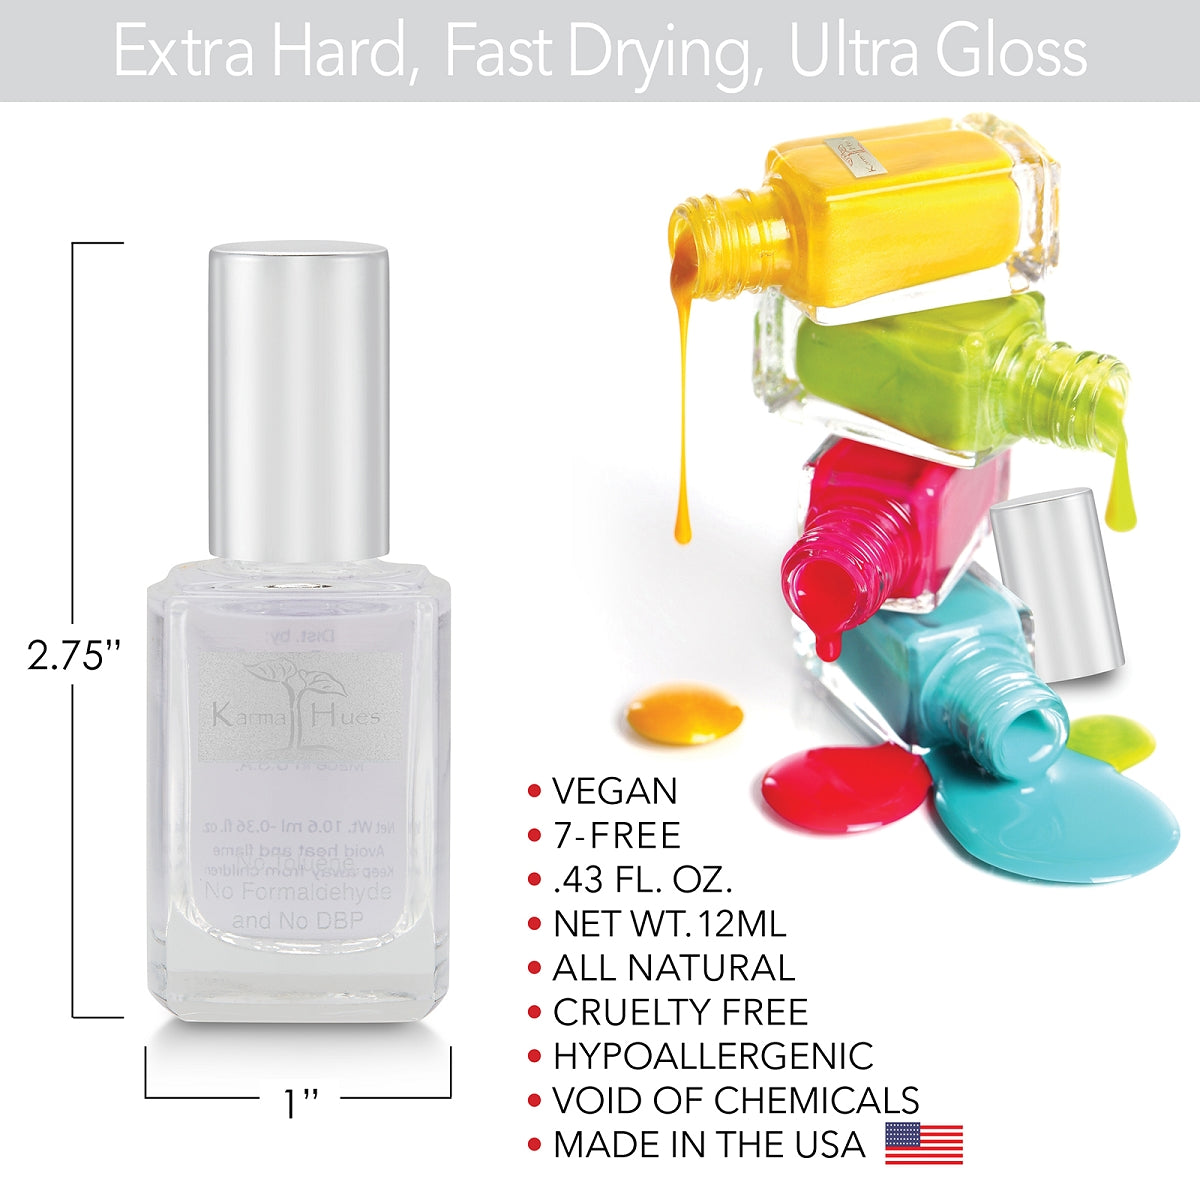 2 in 1 Base & Top Coat -Nail Polish; Non-Toxic, Vegan, and Cruelty-Free (2IN1PL)